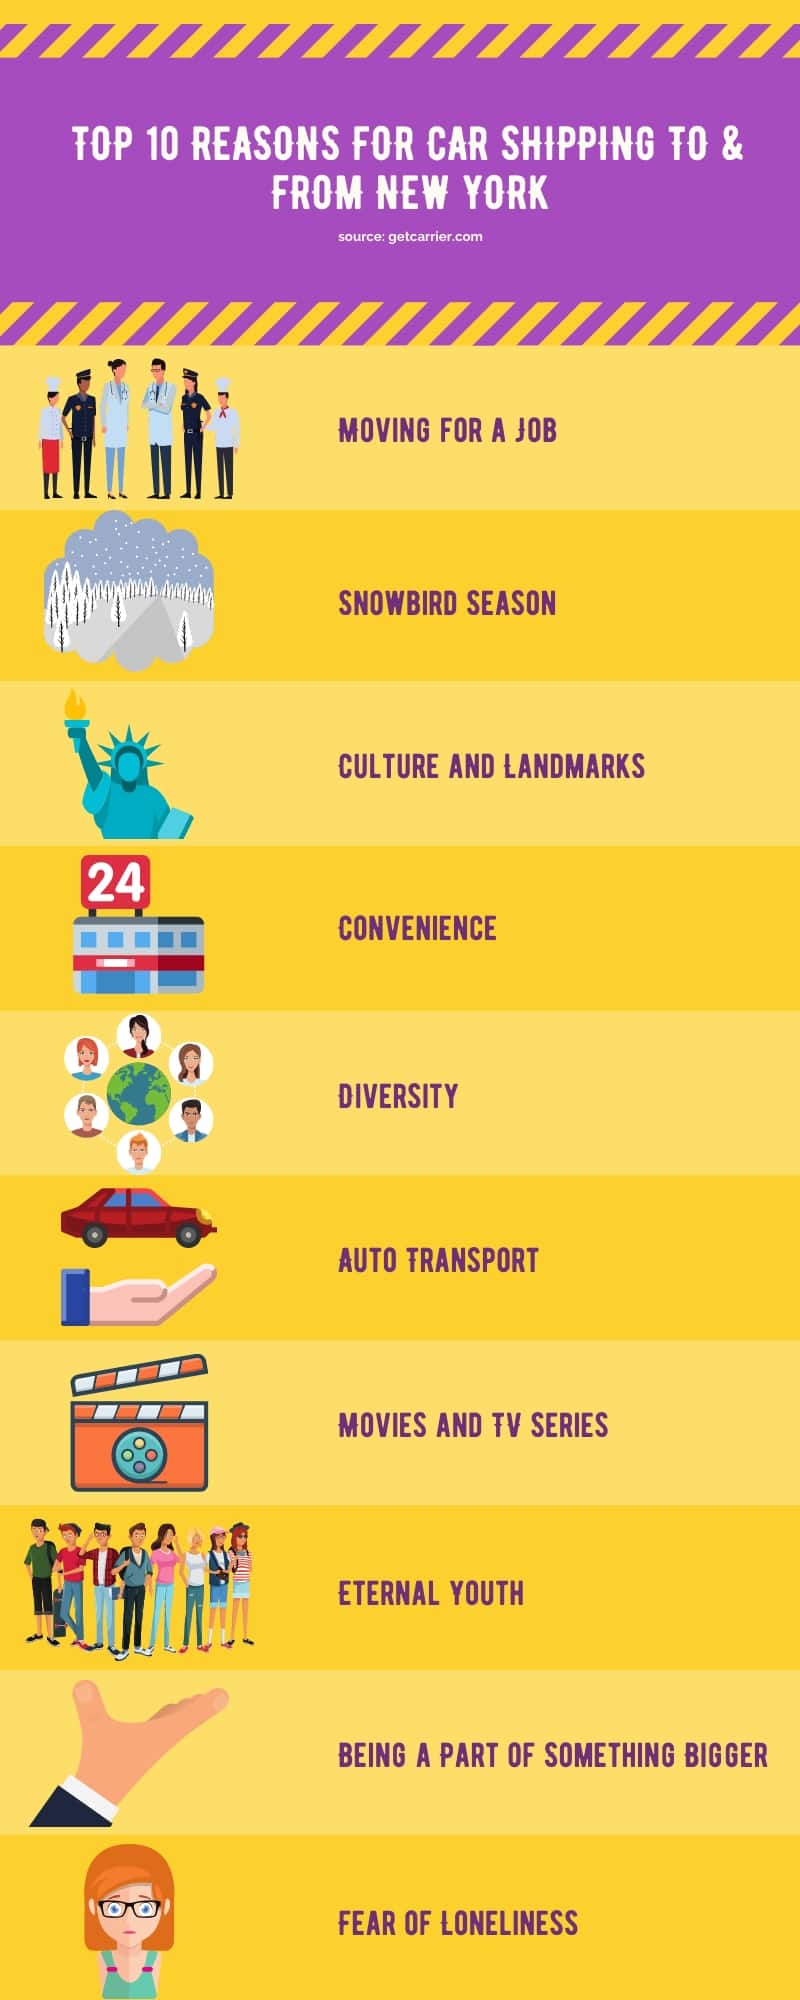 Top 10 Reasons for Car Shipping to & from New York Infographic